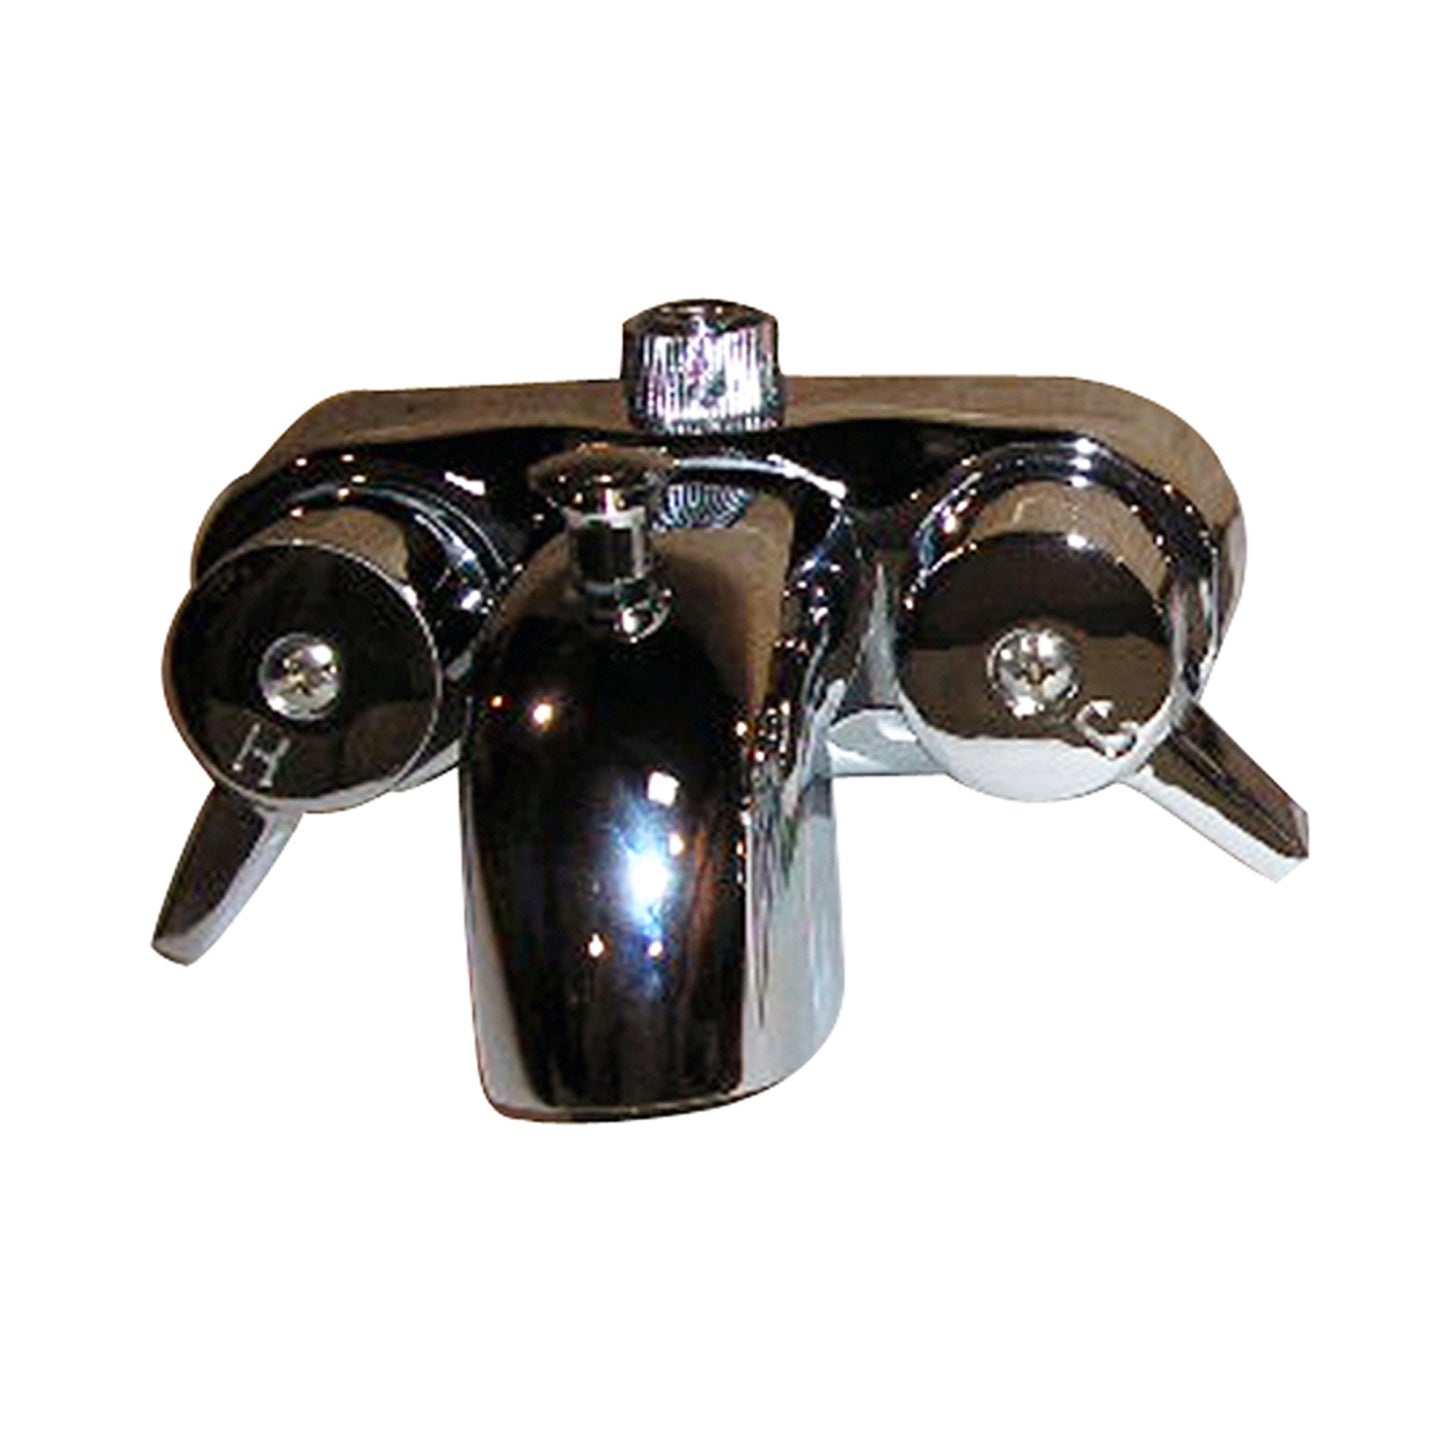 Basic Tub Faucet Kit with 54" x 24" Rod & Shower Head in Polished Chrome